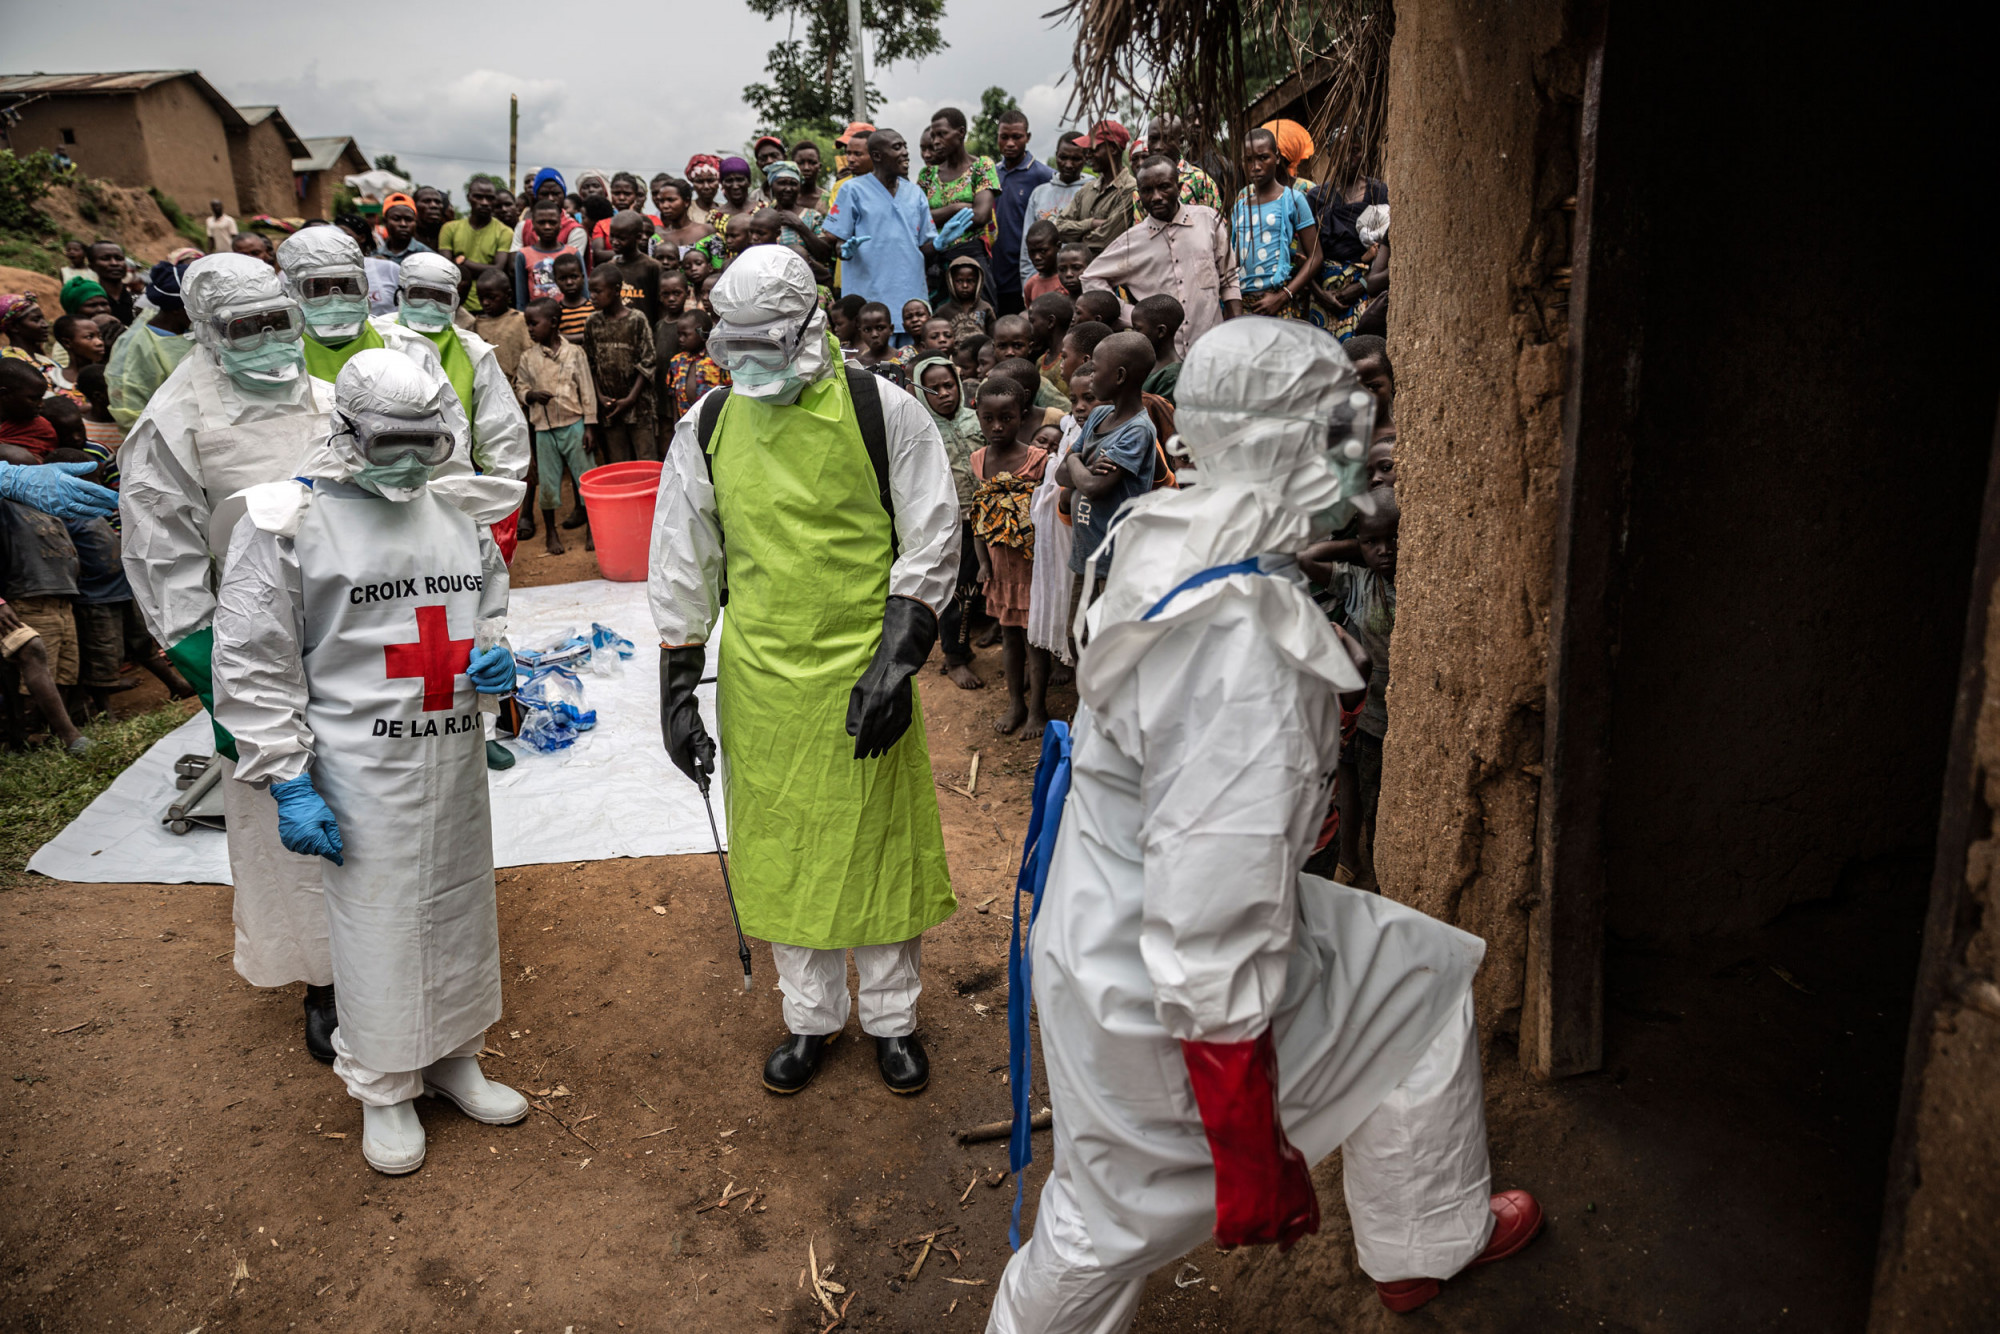 Rutshuru in Congo’s North Kivu Province, February 2020 [1] Neighbours and Red Cross workers in protective clothing prepare to bury an 11-month-old girl who died during Congo’s Ebola outbreak. © Finbarr O’Reilly pour la Fondation Carmignac